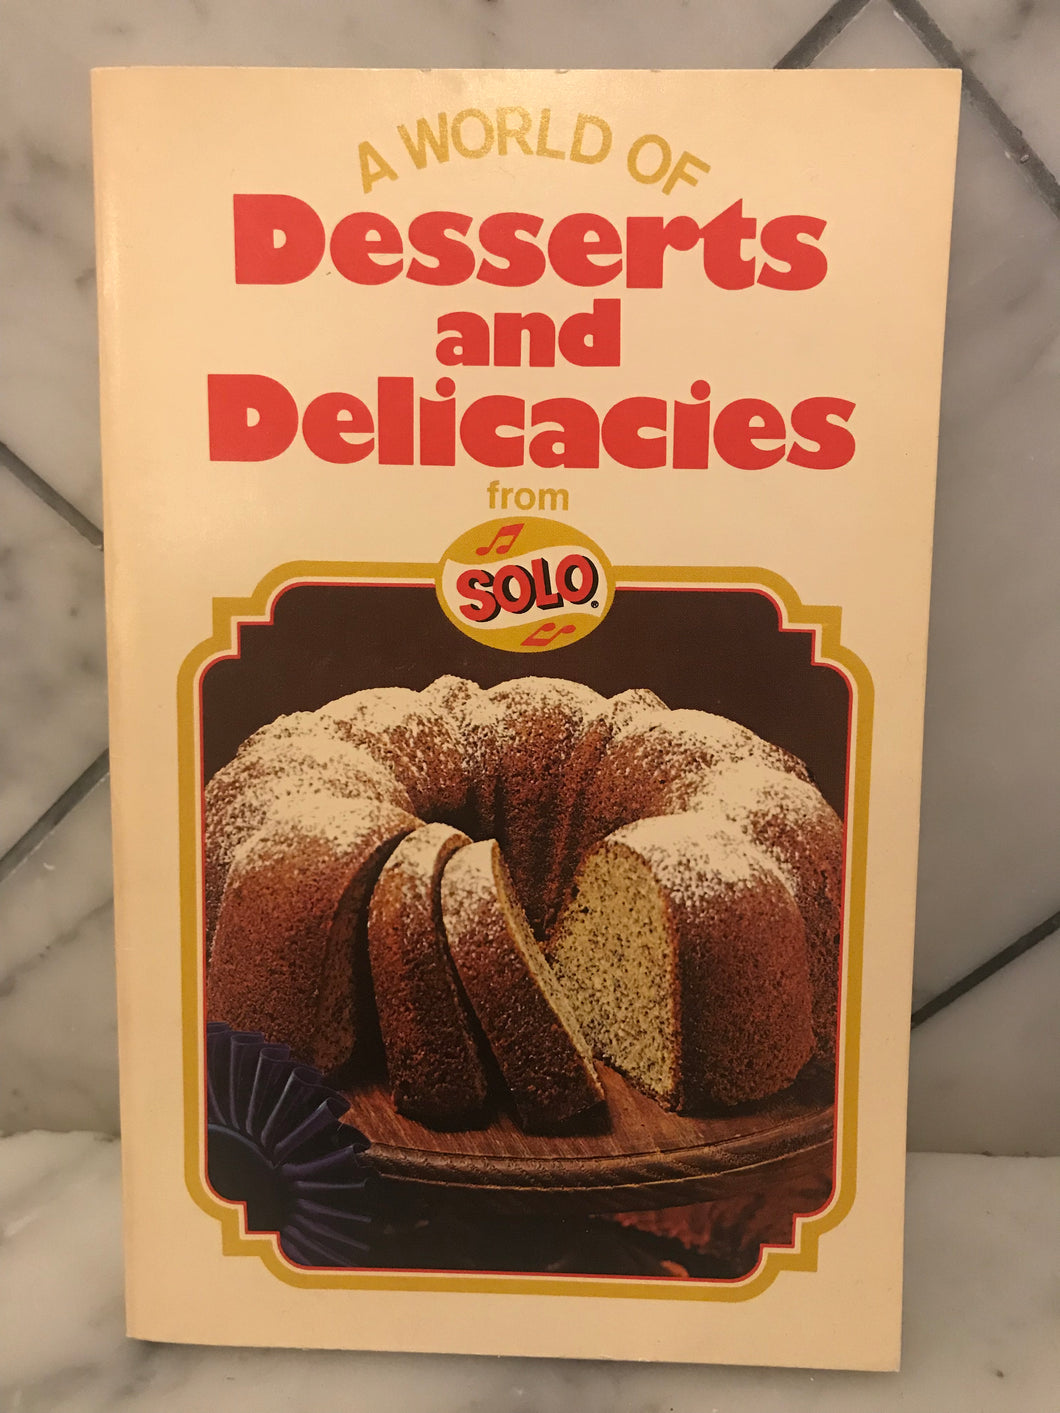 A World of Desserts and Delicacies from Solo